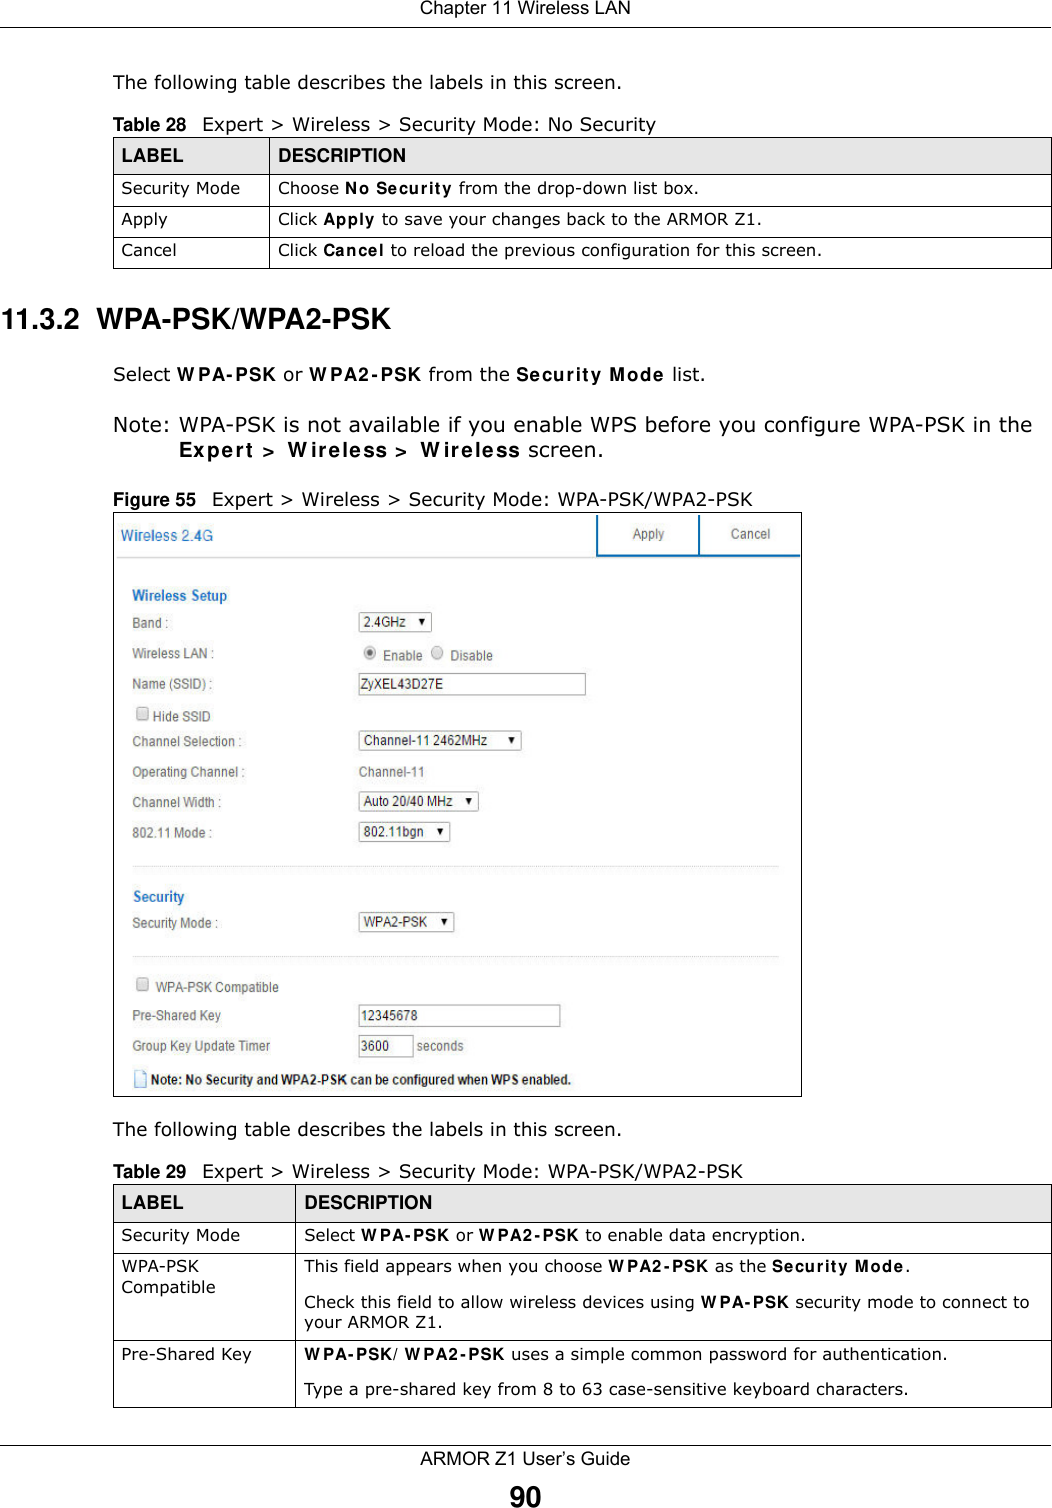 Chapter 11 Wireless LANARMOR Z1 User’s Guide90The following table describes the labels in this screen.11.3.2  WPA-PSK/WPA2-PSKSelect WPA-PSK or WPA2-PSK from the Security Mode list.Note: WPA-PSK is not available if you enable WPS before you configure WPA-PSK in the Expert &gt; Wireless &gt; Wireless screen.Figure 55   Expert &gt; Wireless &gt; Security Mode: WPA-PSK/WPA2-PSKThe following table describes the labels in this screen.Table 28   Expert &gt; Wireless &gt; Security Mode: No SecurityLABEL DESCRIPTIONSecurity Mode Choose No Security from the drop-down list box.Apply Click Apply to save your changes back to the ARMOR Z1.Cancel Click Cancel to reload the previous configuration for this screen.Table 29   Expert &gt; Wireless &gt; Security Mode: WPA-PSK/WPA2-PSKLABEL DESCRIPTIONSecurity Mode Select WPA-PSK or WPA2-PSK to enable data encryption.WPA-PSK CompatibleThis field appears when you choose WPA2-PSK as the Security Mode.Check this field to allow wireless devices using WPA-PSK security mode to connect to your ARMOR Z1.Pre-Shared Key  WPA-PSK/WPA2-PSK uses a simple common password for authentication.Type a pre-shared key from 8 to 63 case-sensitive keyboard characters.